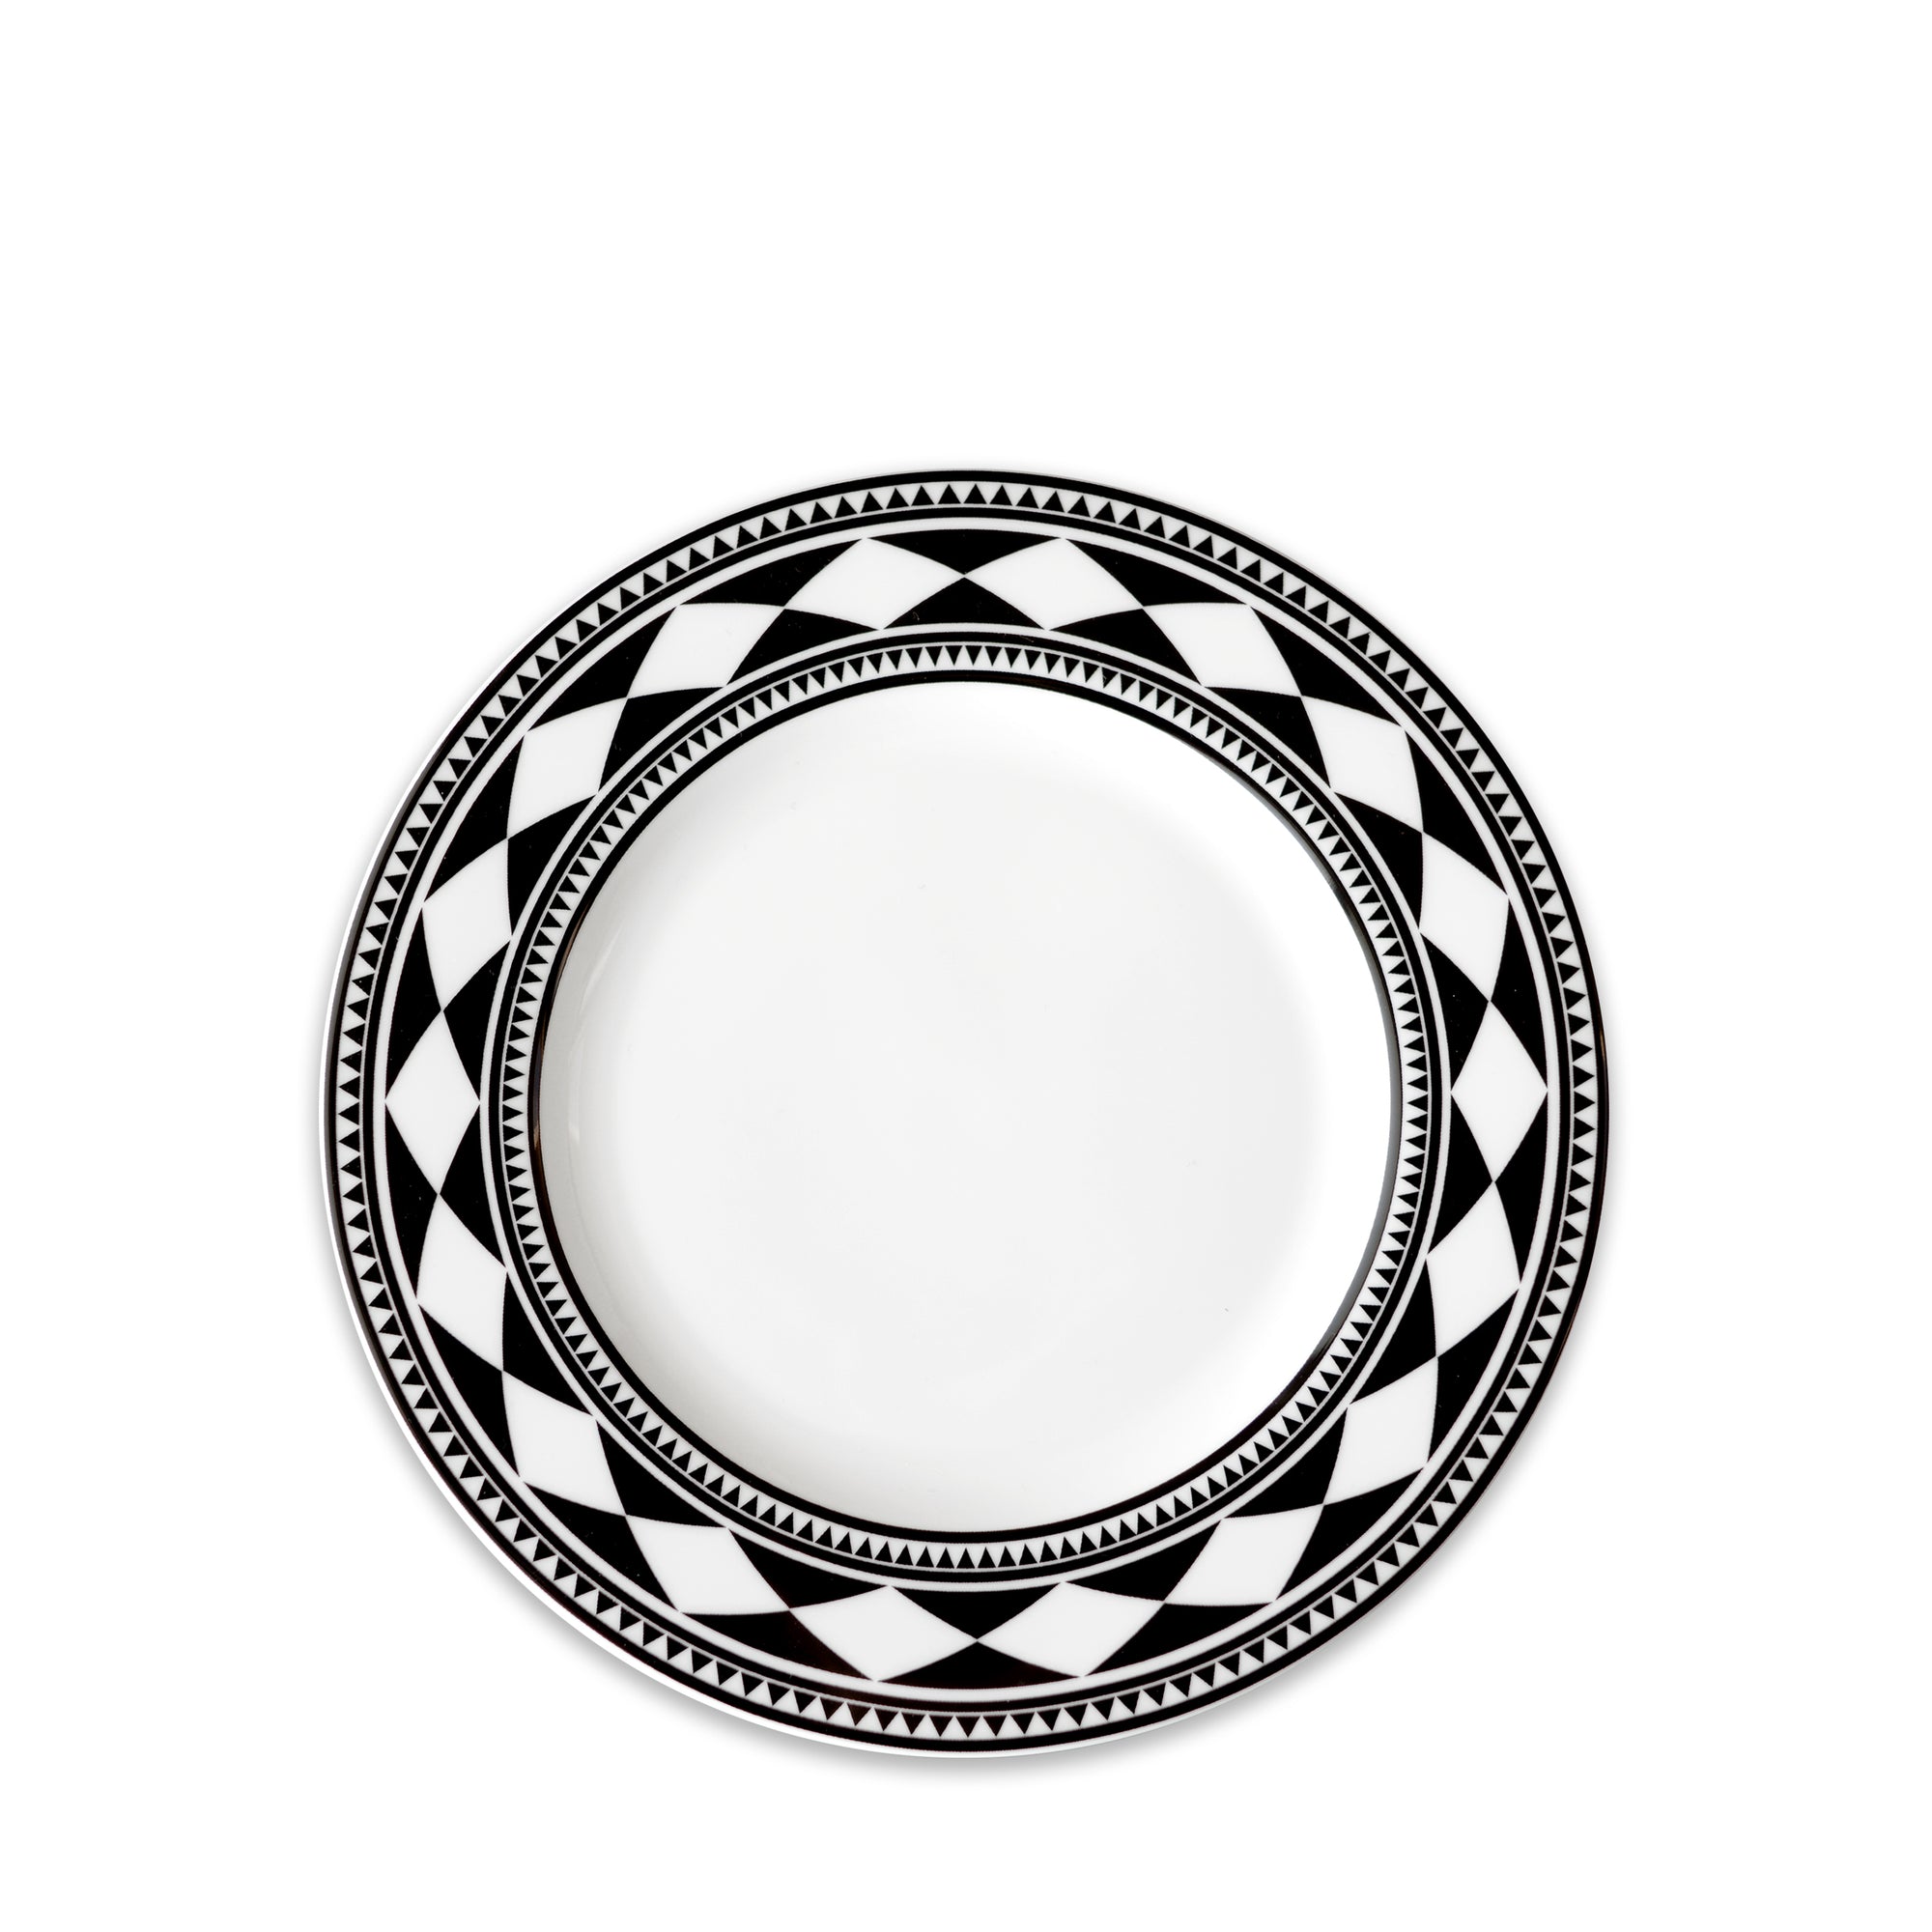 A white ceramic Fez Rimmed Salad Plate by Caskata Artisanal Home features a black geometric pattern around its rim, combining triangular and zigzag motifs for a bold geometrics effect that exudes a sophisticated global feel.